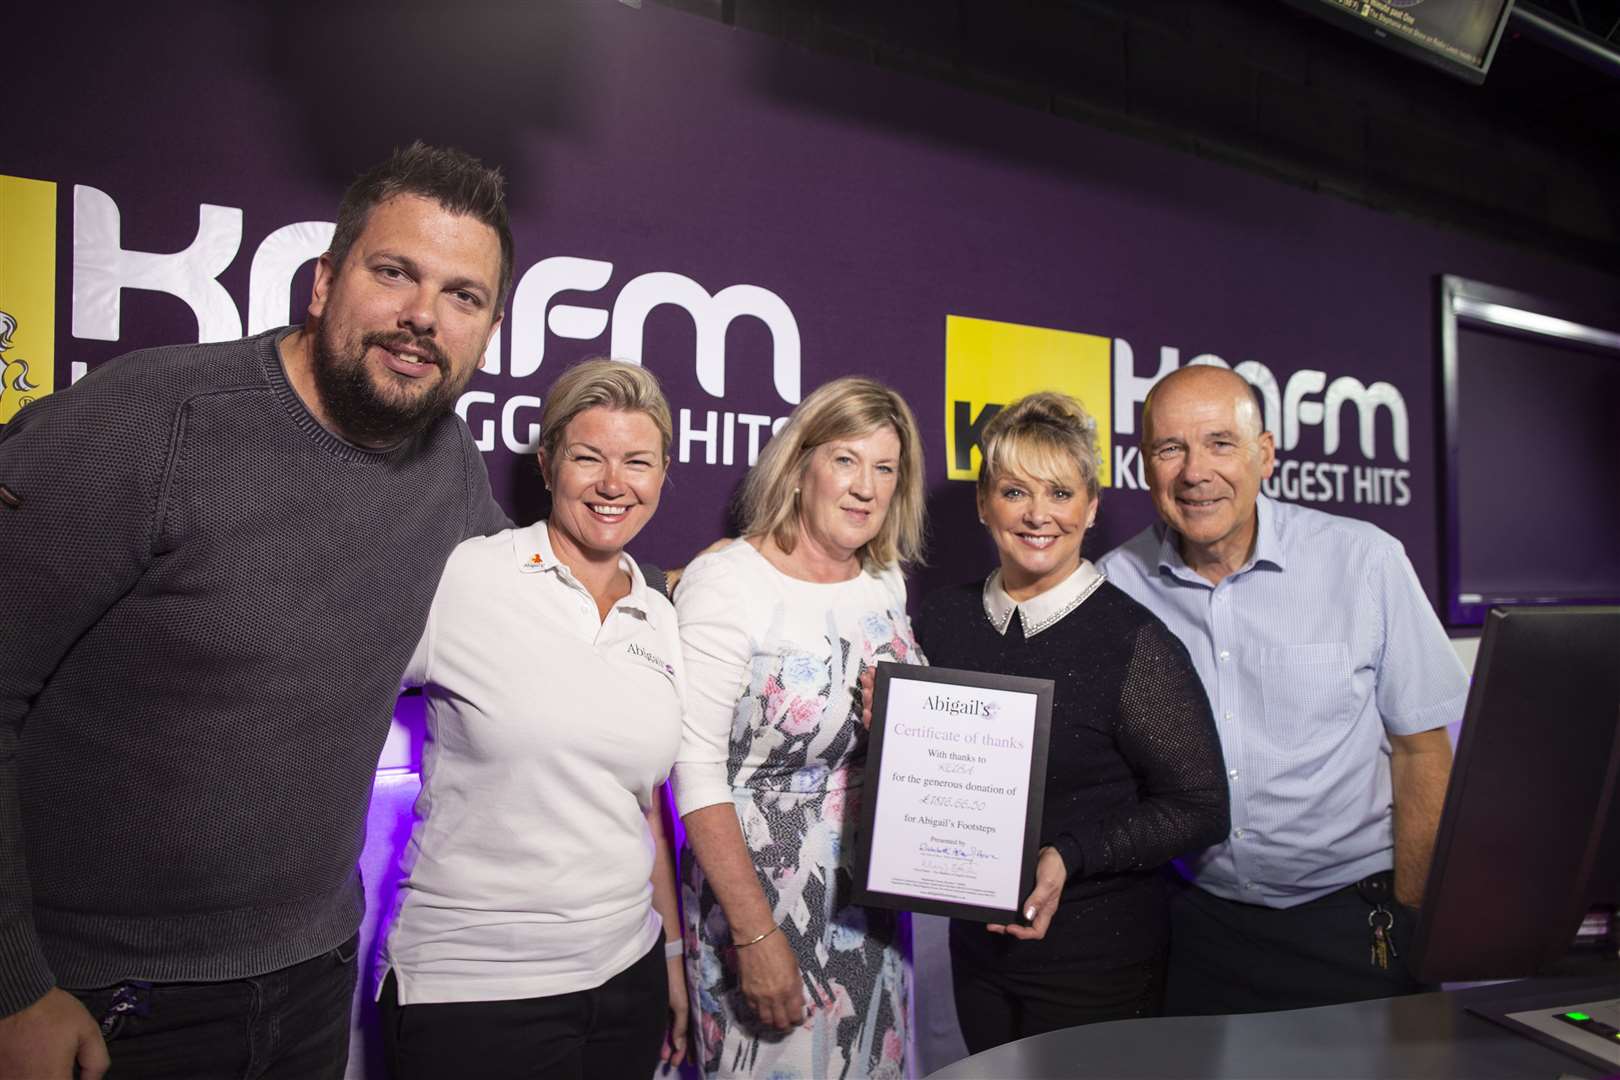 Cheryl Baker in the kmfm studios to present a certificate to the KM team for money raised for the charity Abigail's Footsteps